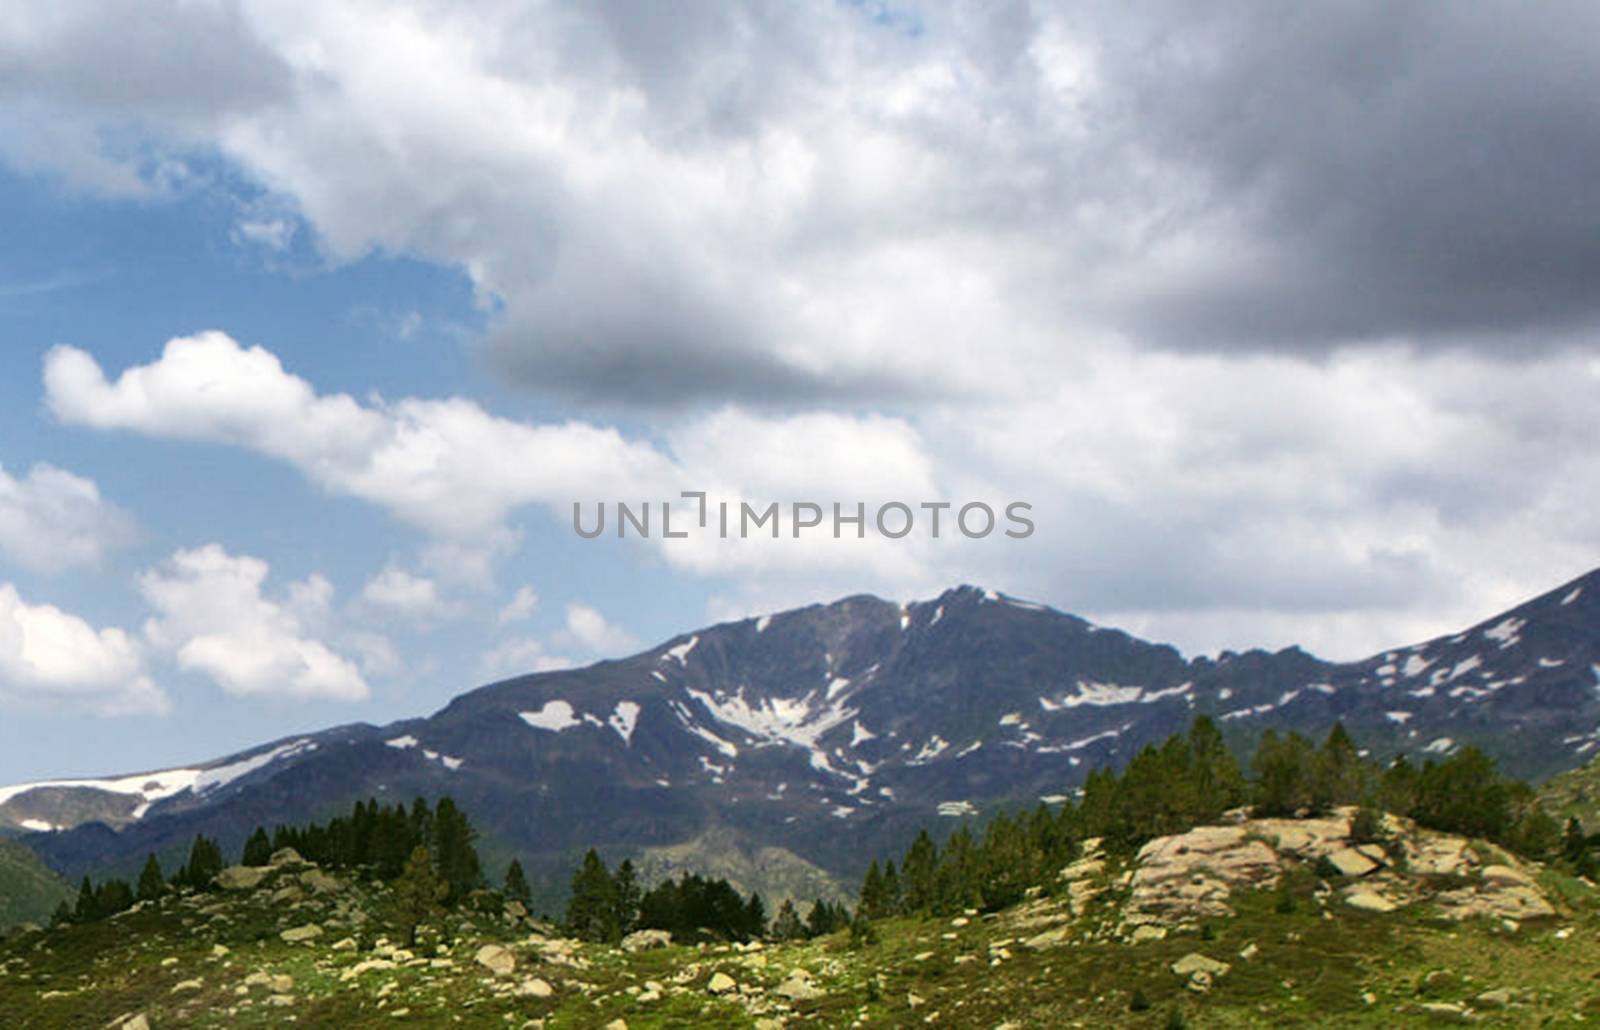 Beautiful pictures of Andorra